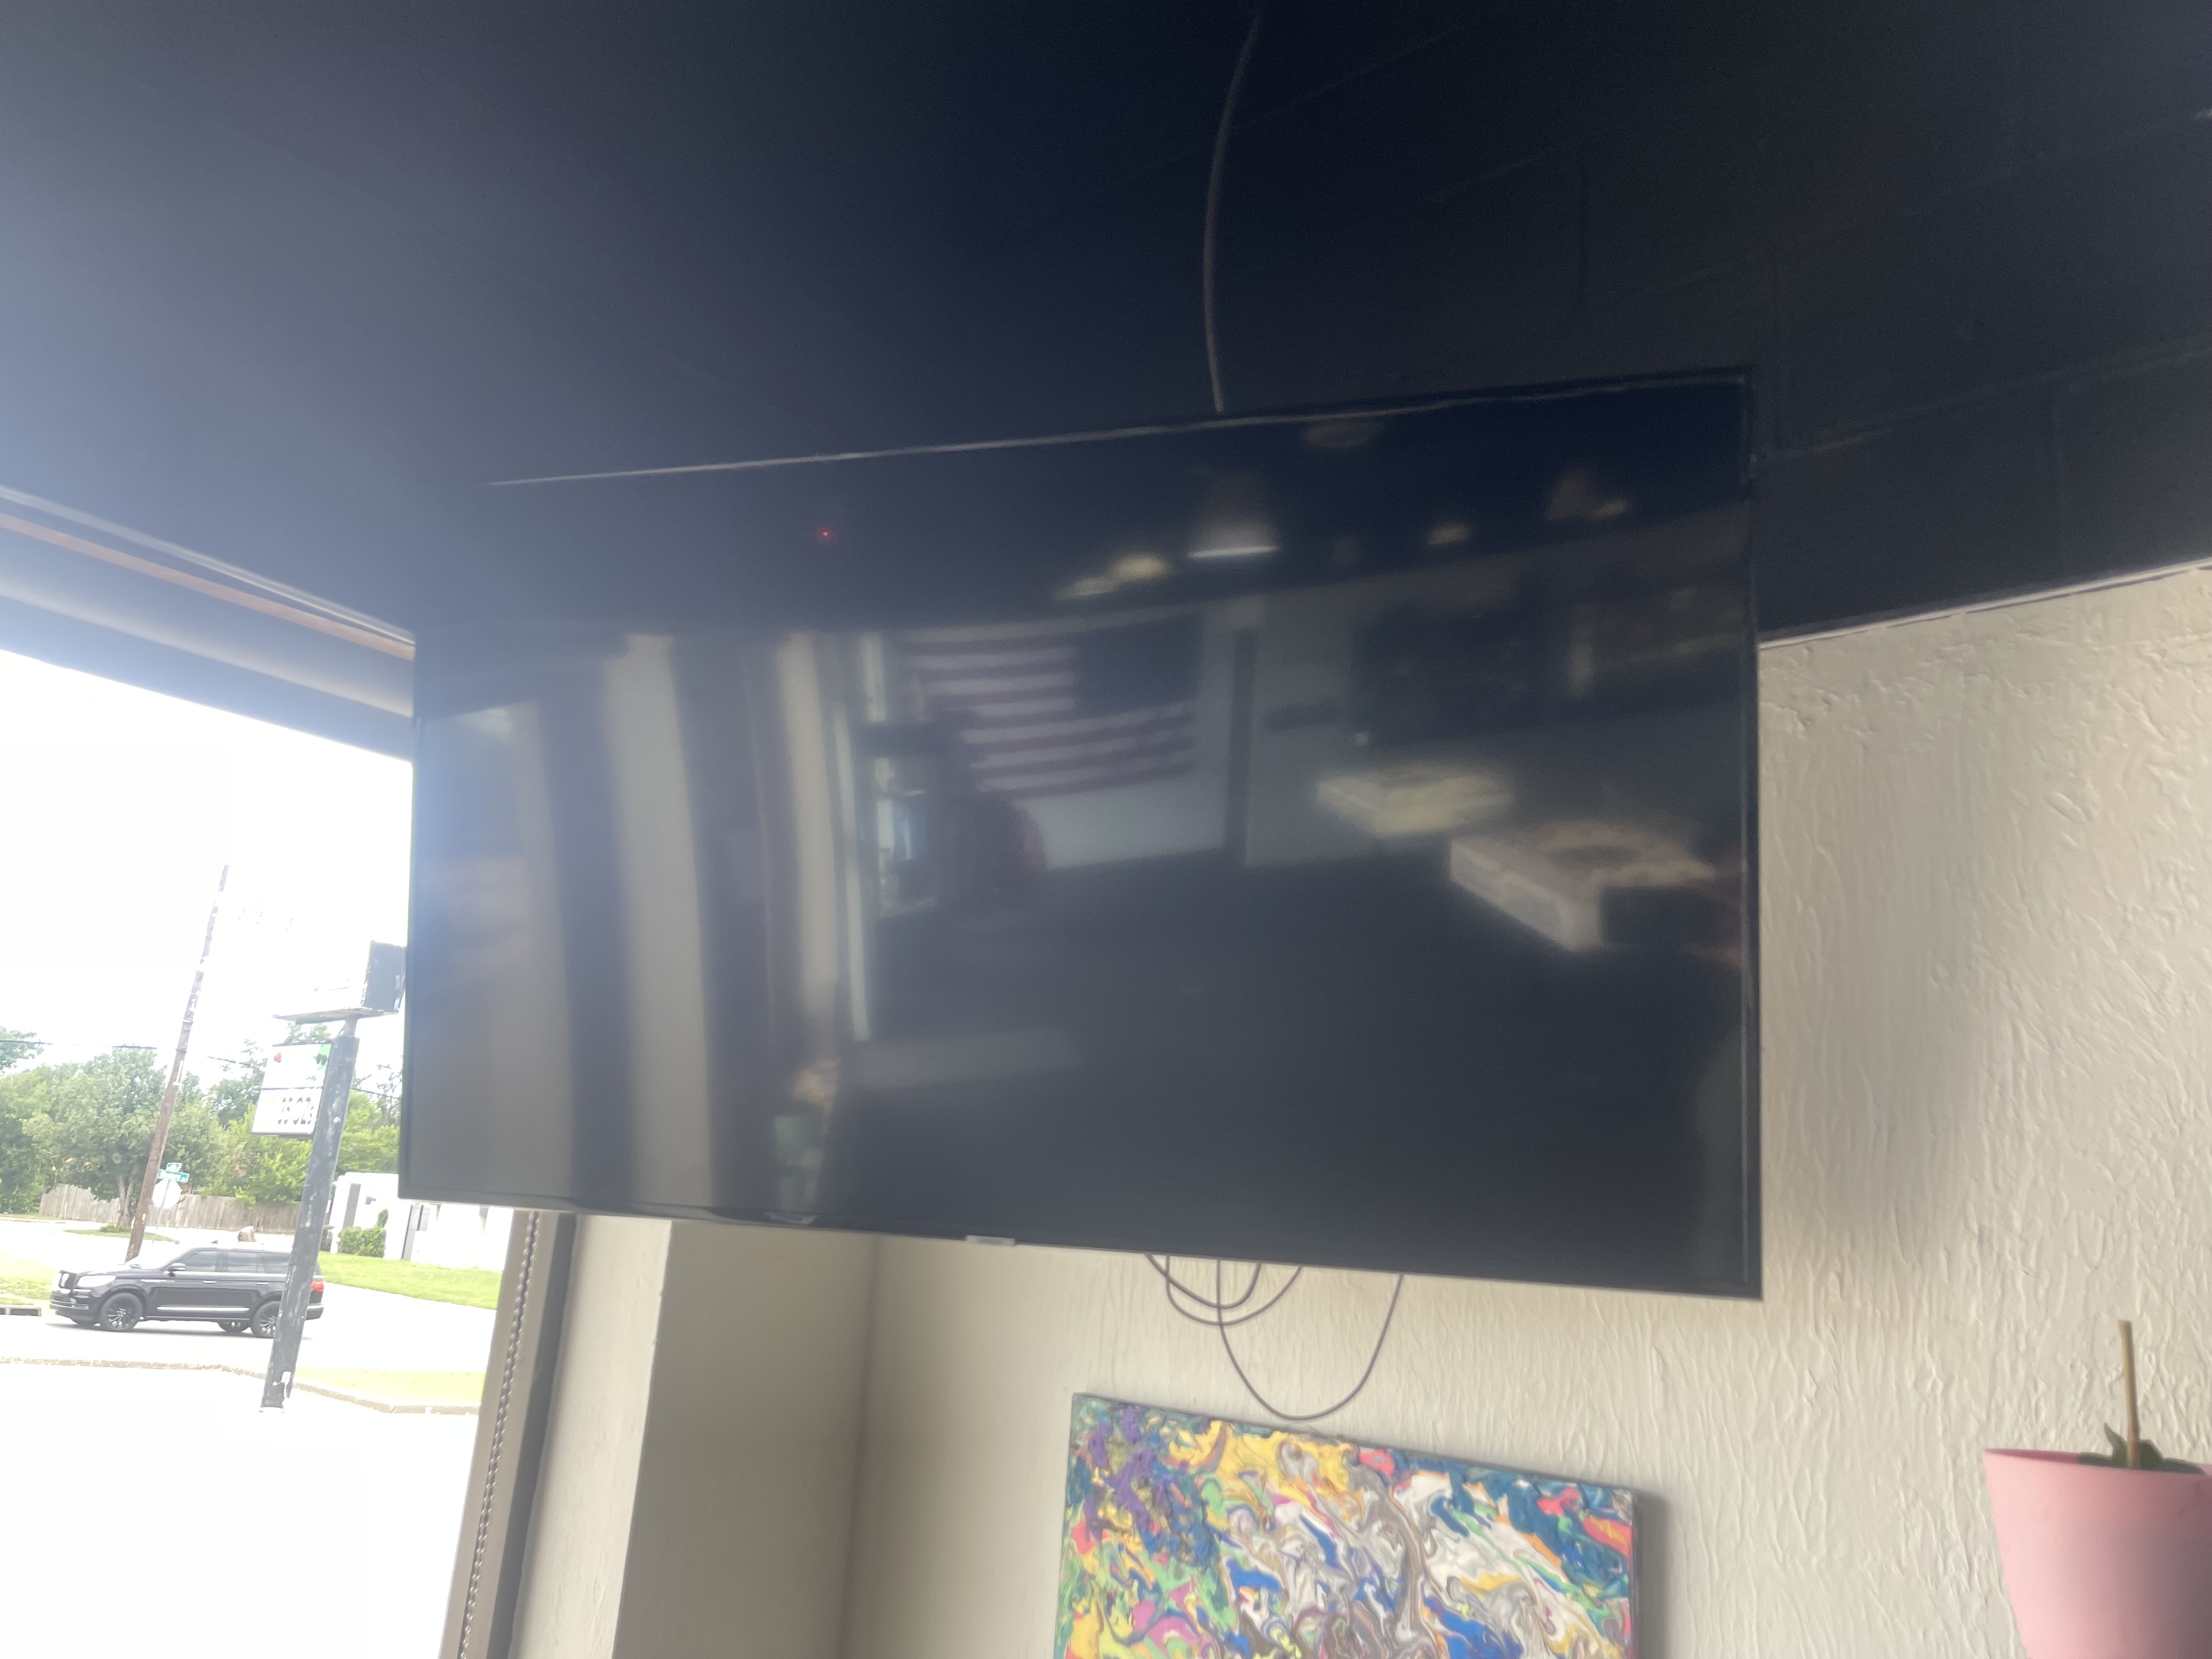 Doms TV Mounting OKC: Elevating Your TV Mounting Experience in Oklahoma City, Oklahoma 73139